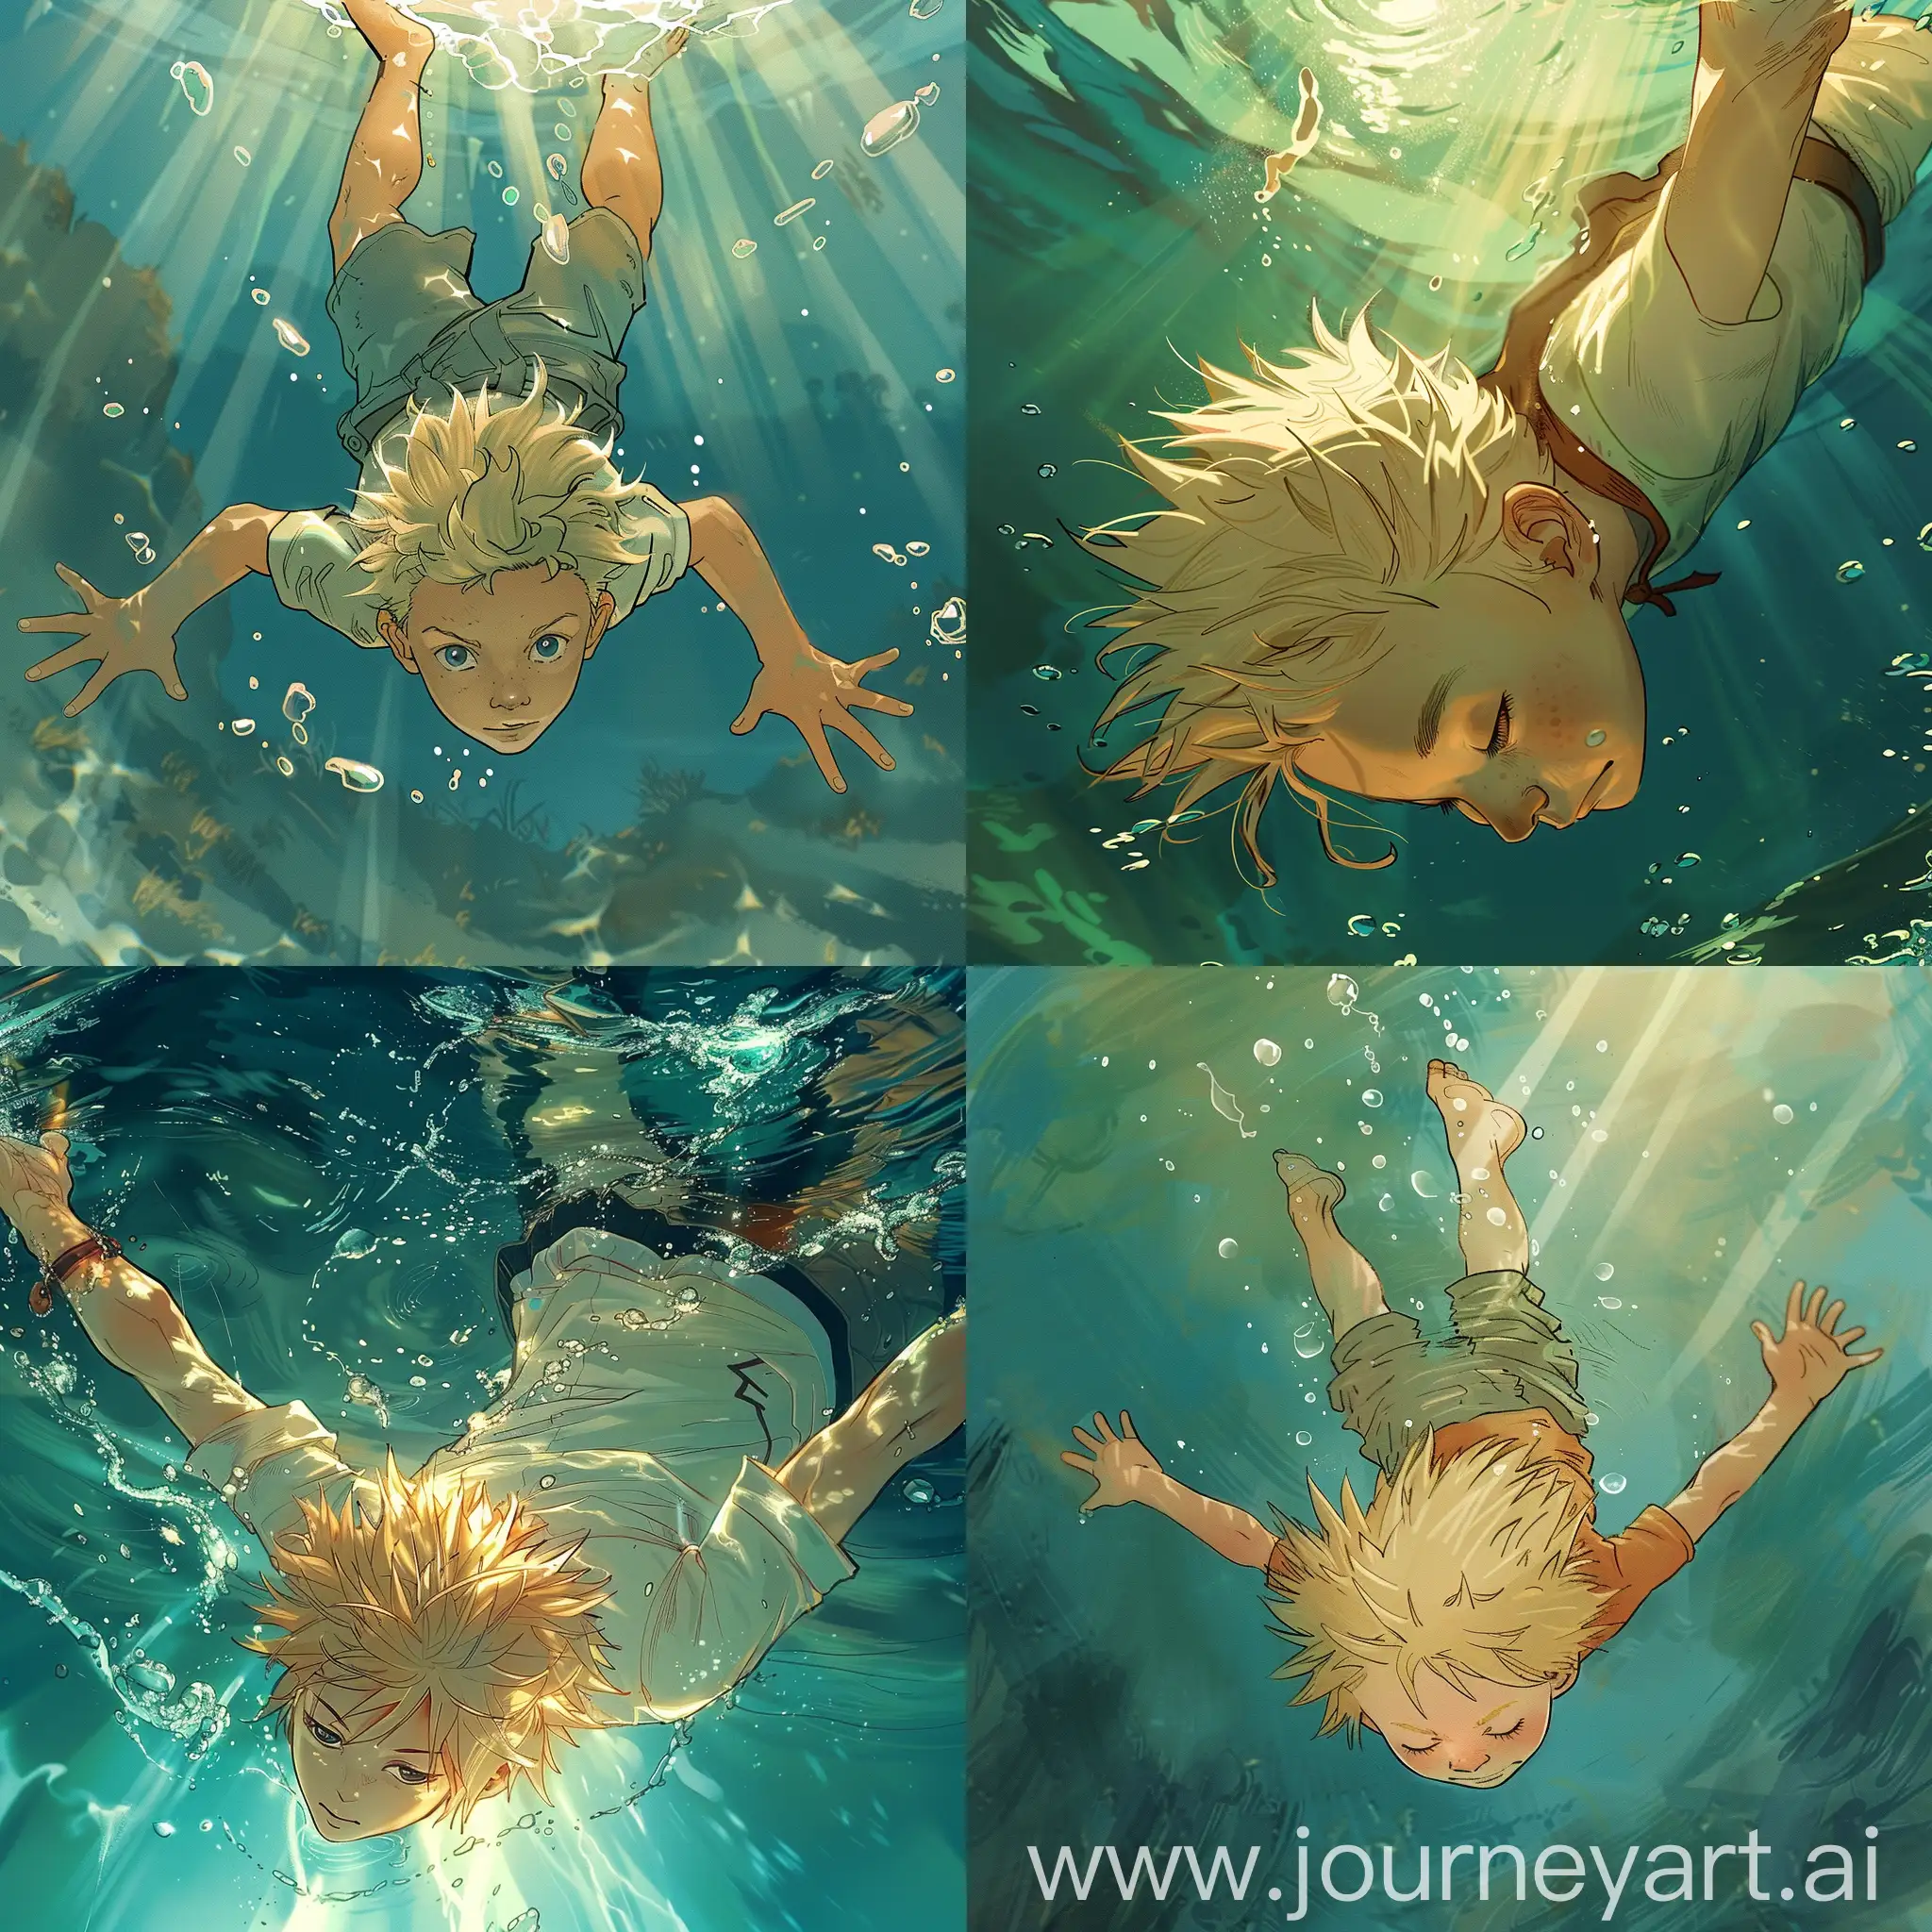 a boy with Blonde spiky hair is swimming under the water, ethereal illustrations, in the style of detailed comic book art, transcendental, playfully intricate